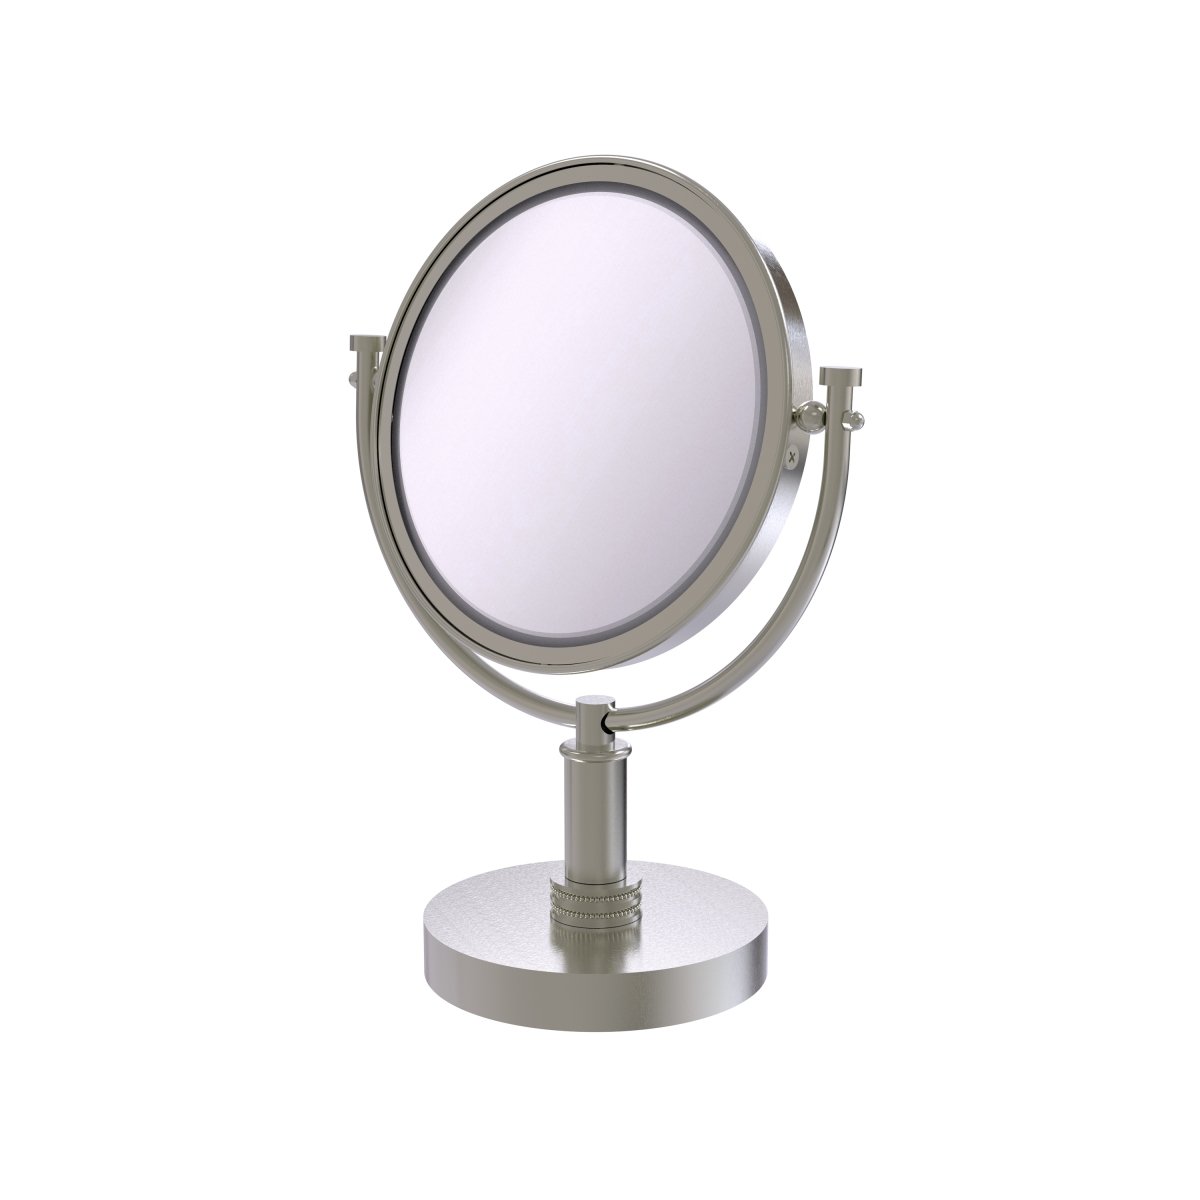 Picture of Allied Brass DM-4D-3X-SN 8 in. Vanity Top Make-Up Mirror 3X Magnification, Satin Nickel - 15 x 8 x 8 in.